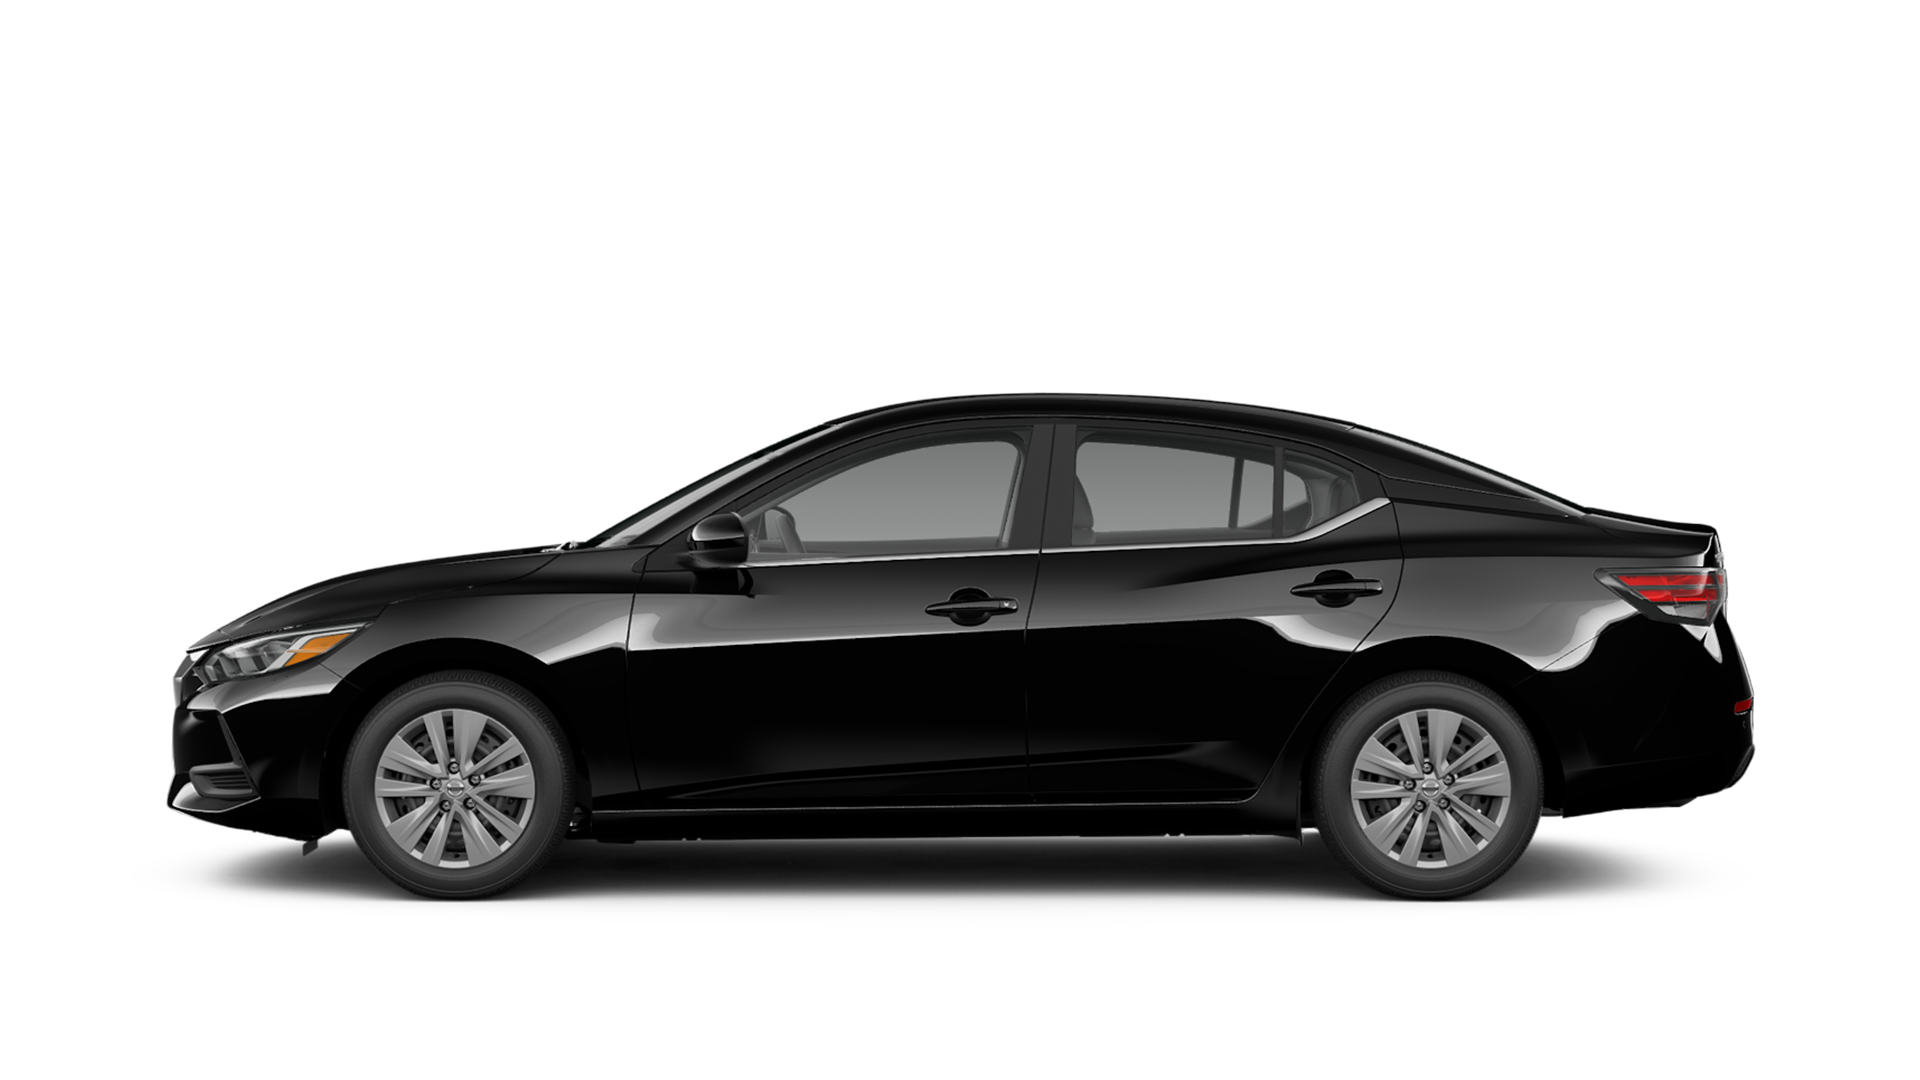 2022 Sentra S | Nissan of Cookeville in Cookeville TN